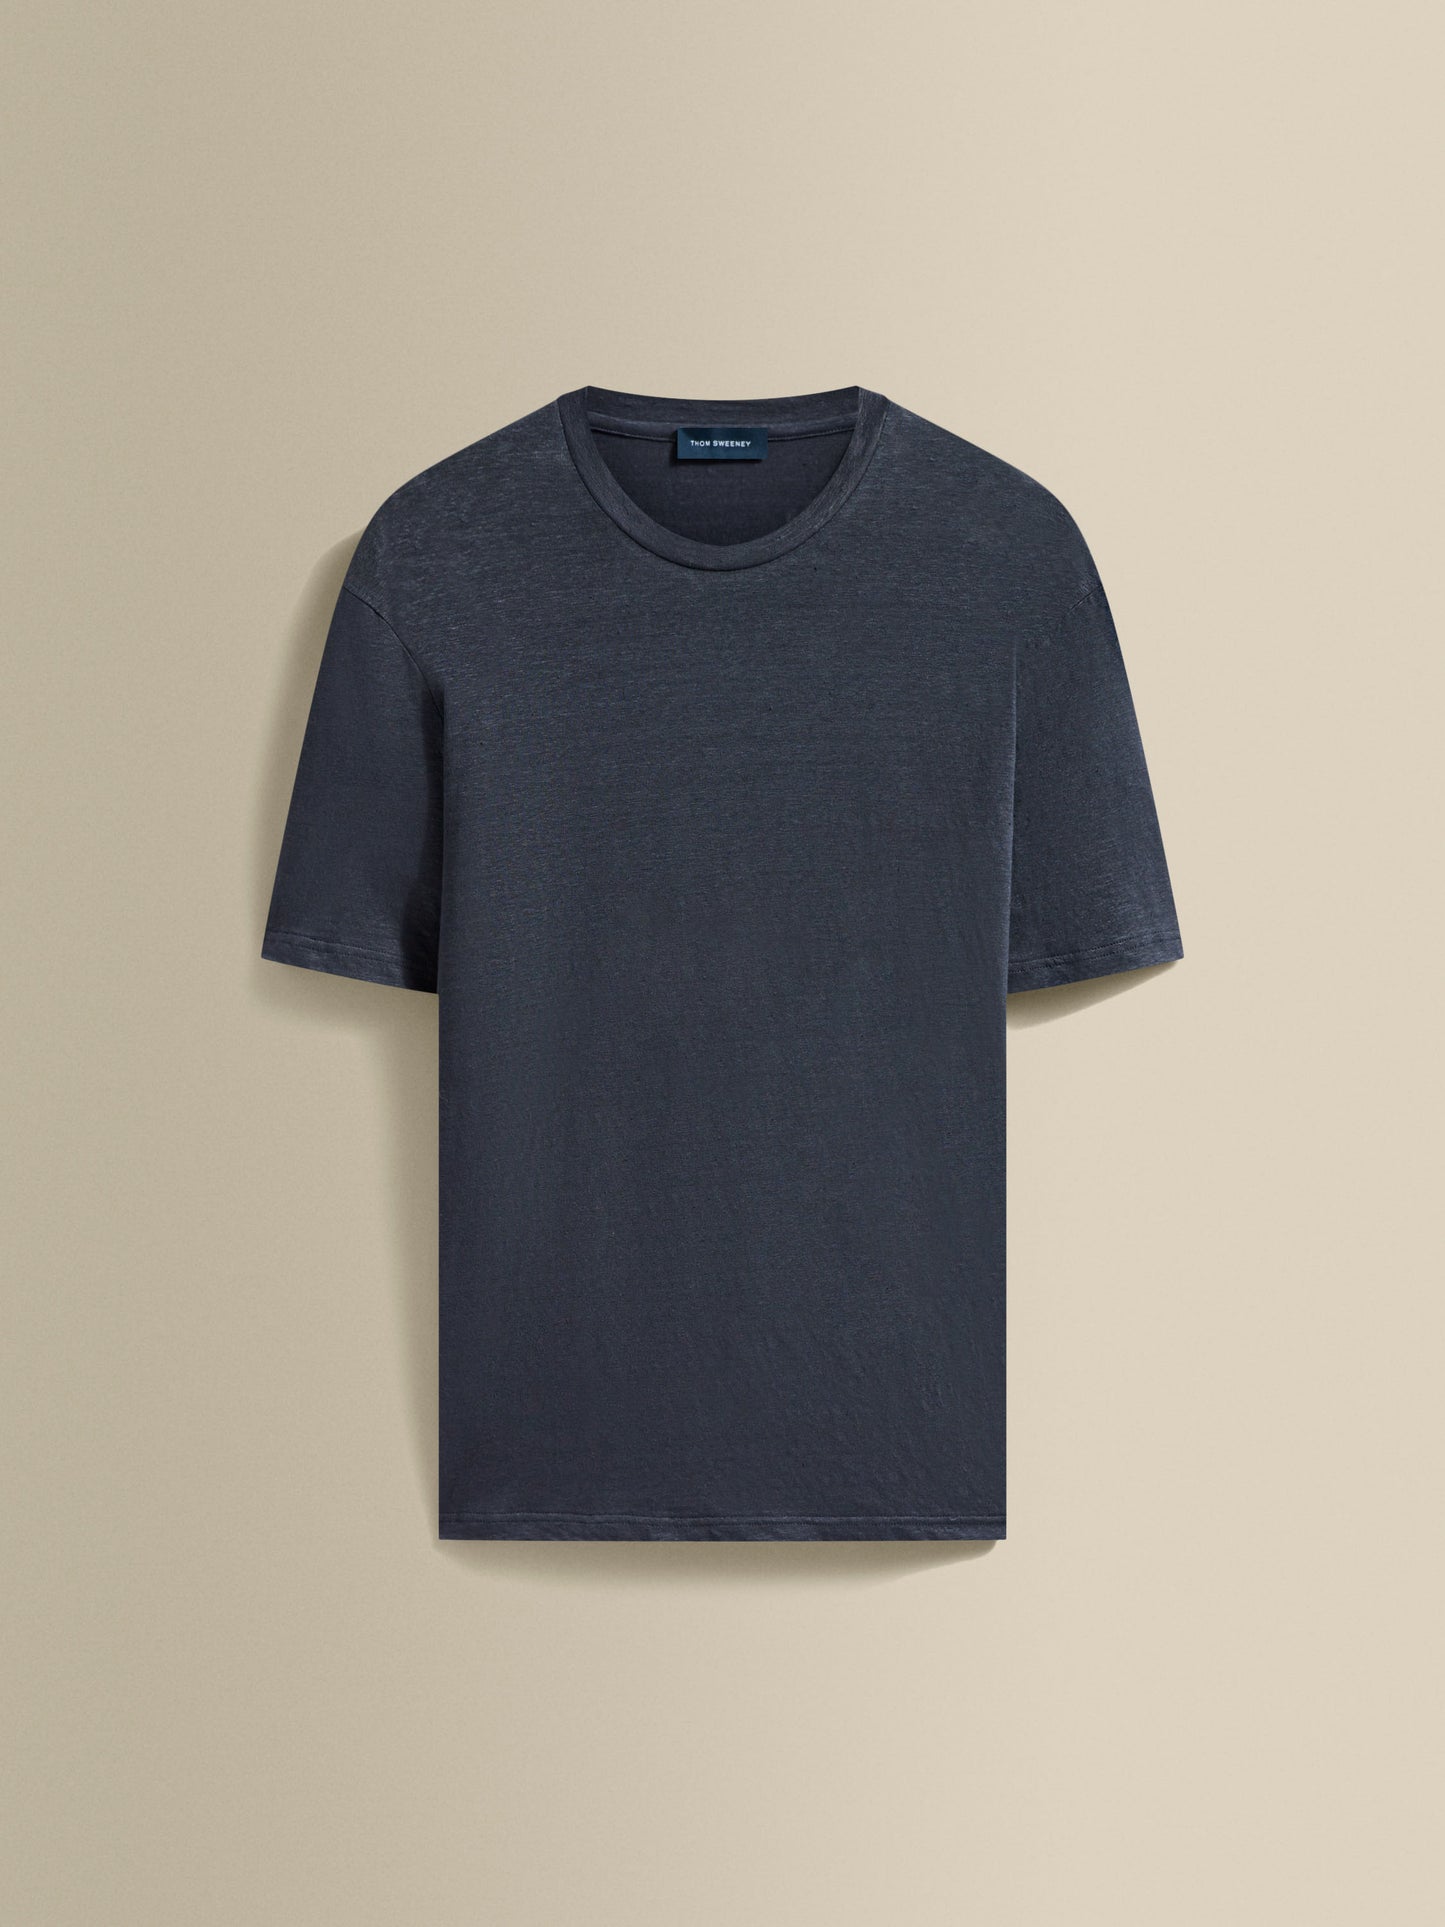 Linen Jersey T-Shirt Navy Product Image